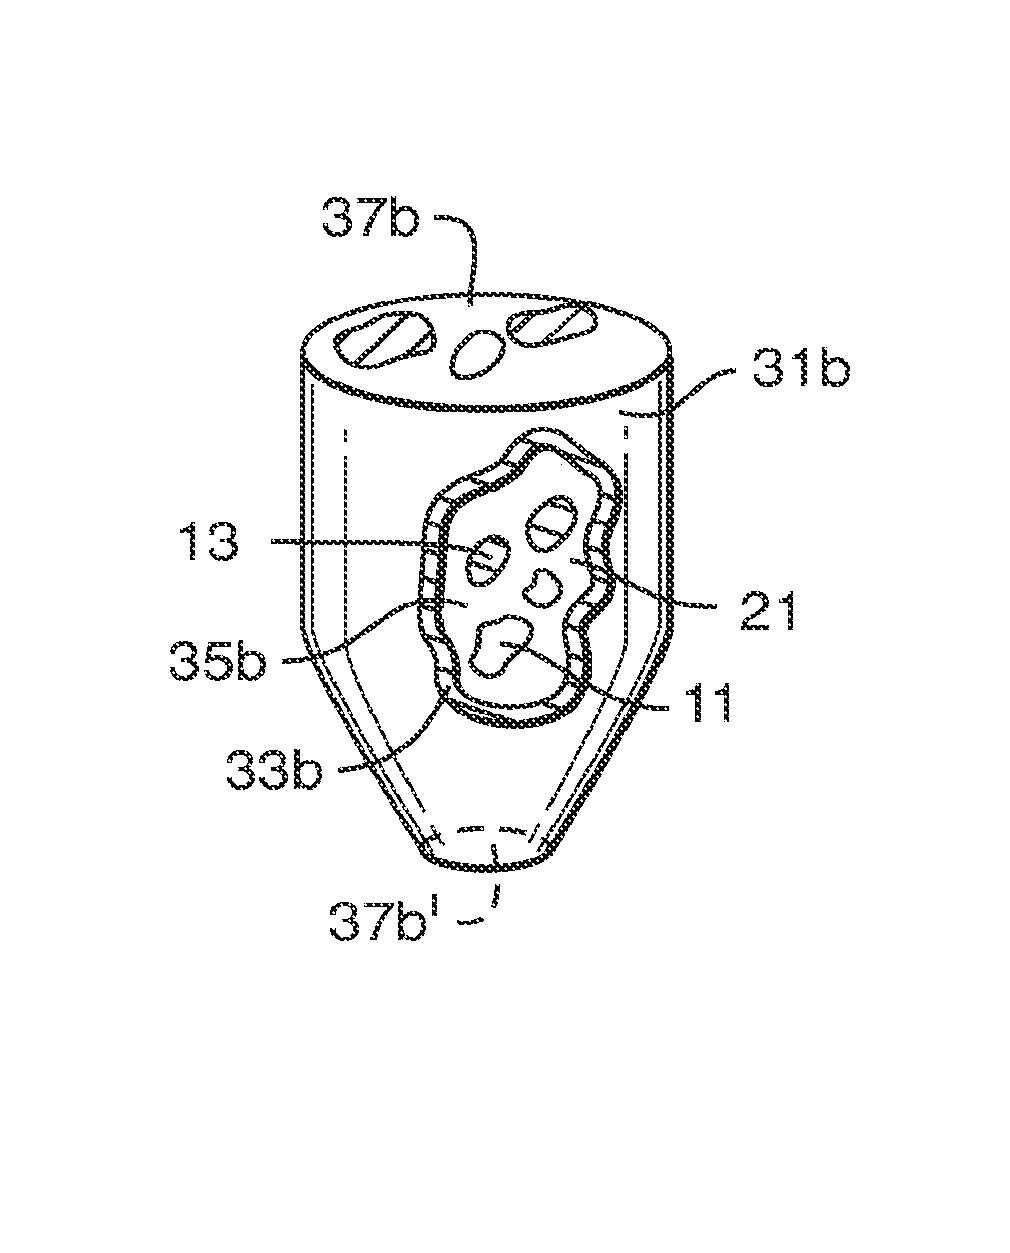 Porous material and devices for performing separations, filtrations, and catalysis and EK pumps, and methods of making and using the same